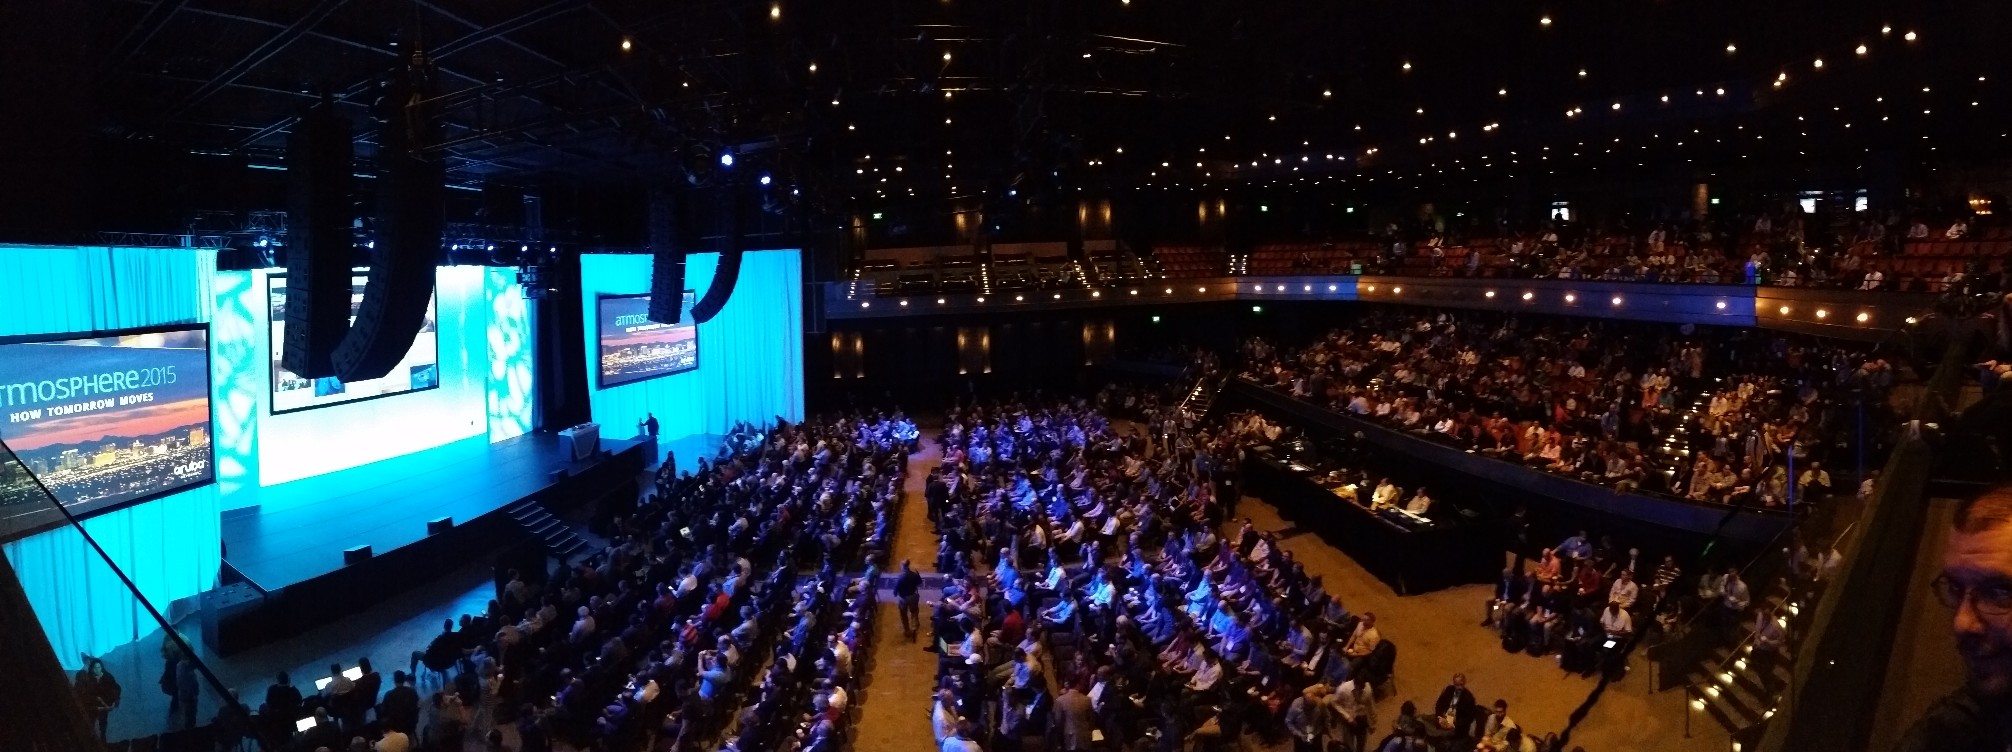 View of the Keynote